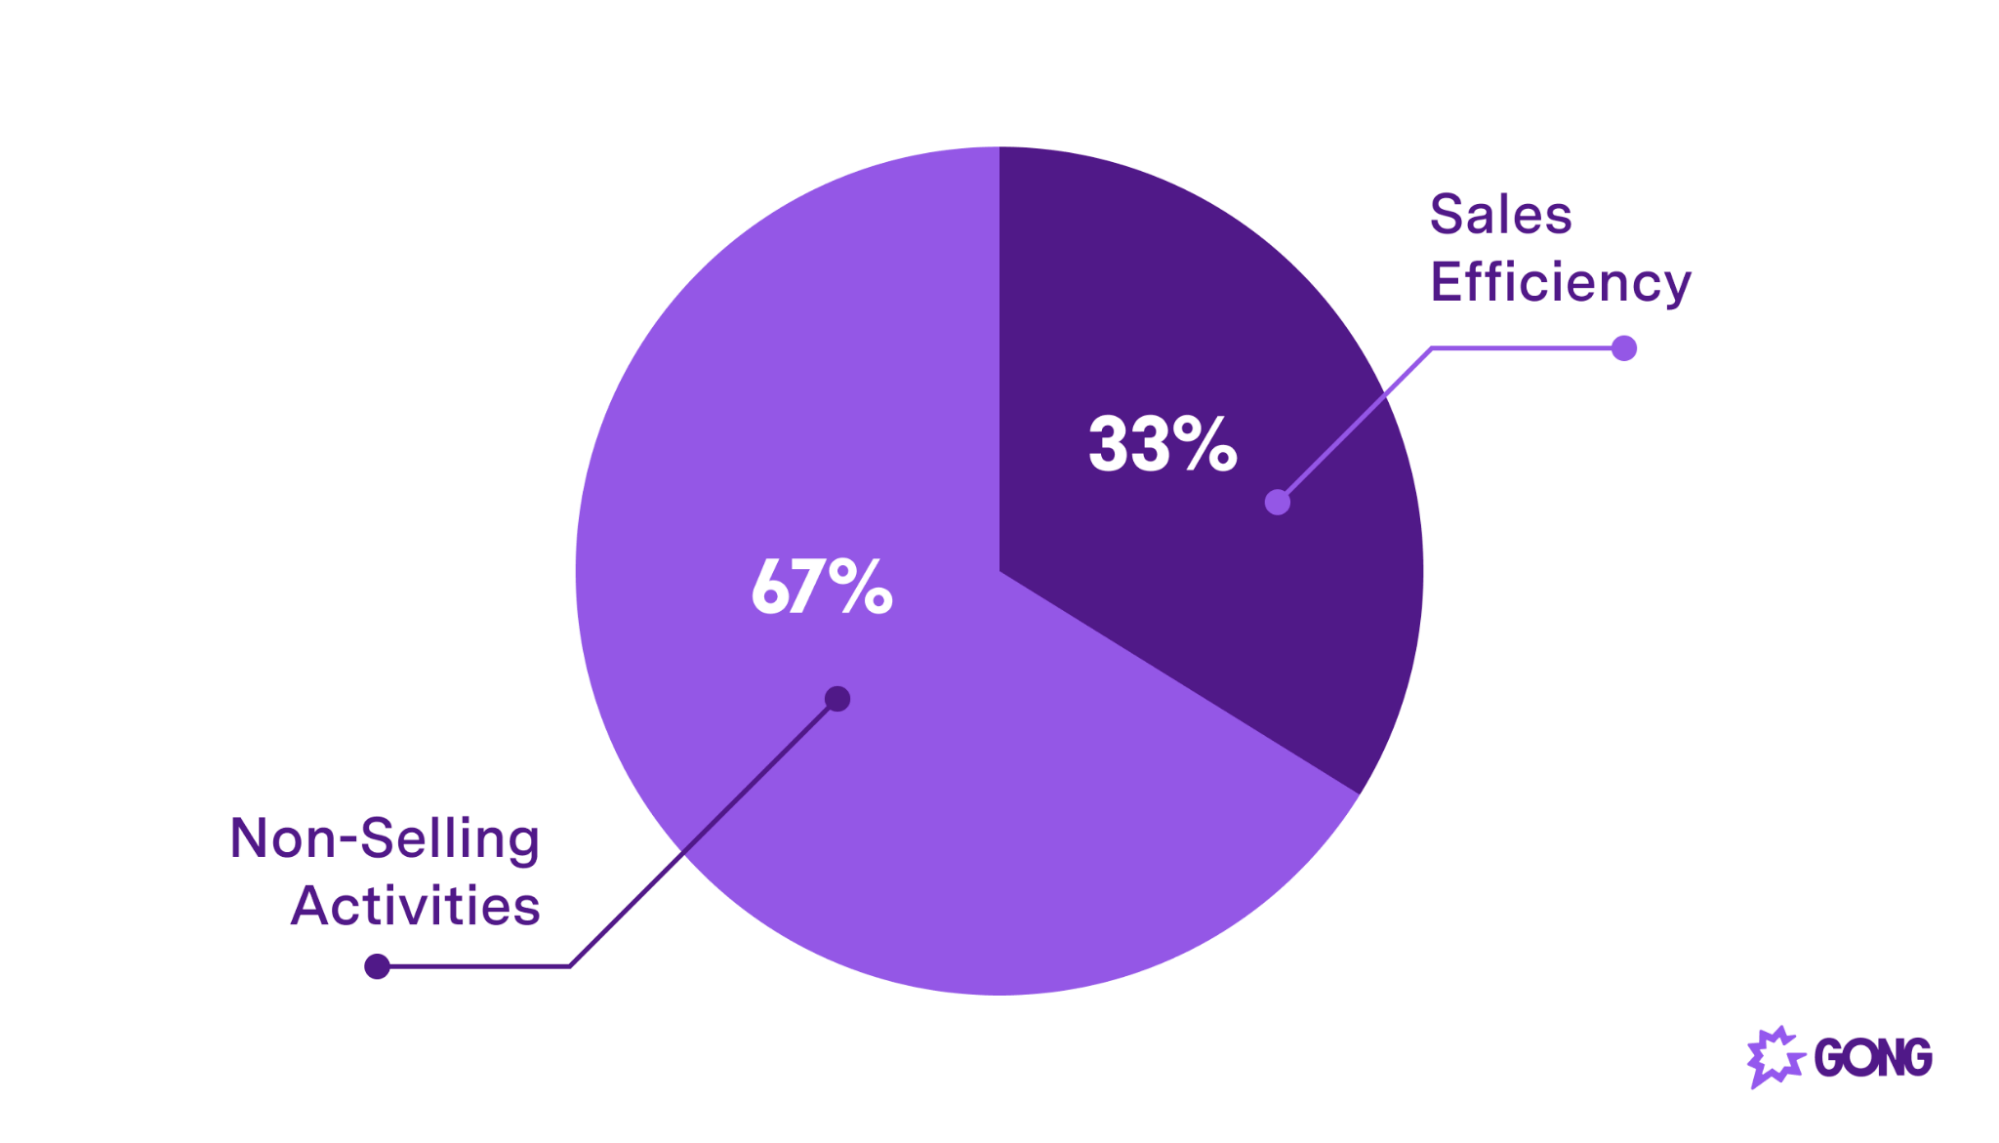 Reps spend most of their time on non-selling activities